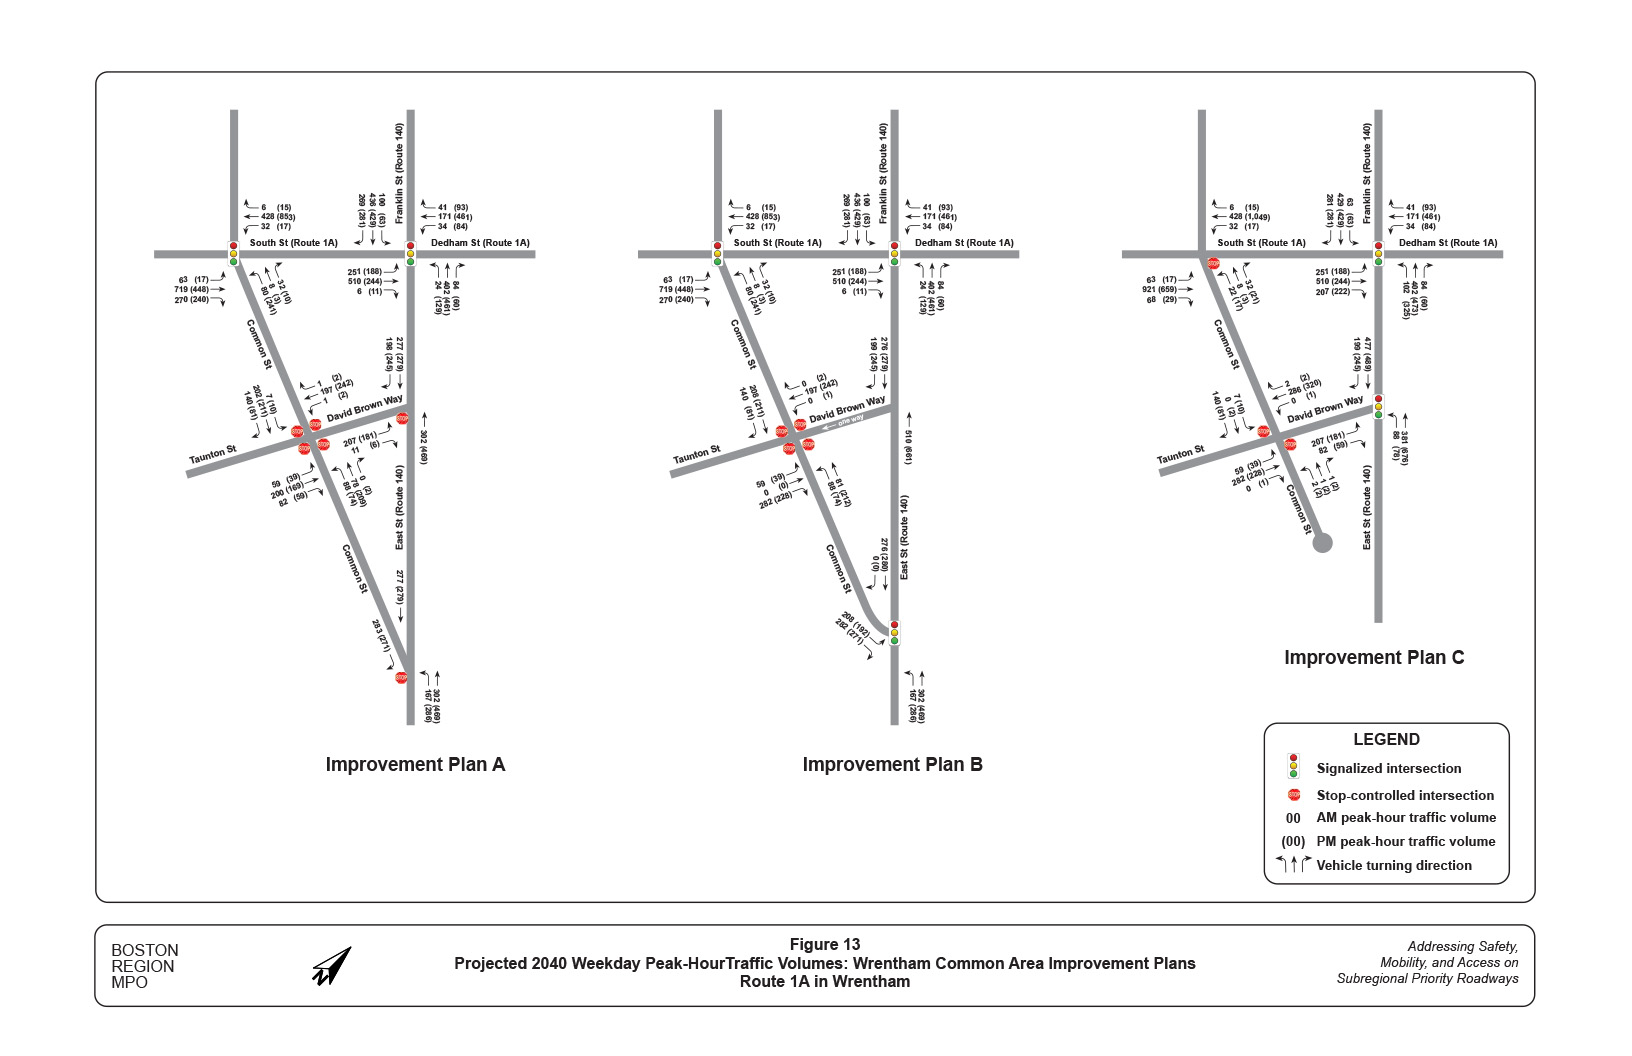 Figure 13 contains three diagrams that provide weekday peak-hour traffic volumes, projected to the year 2040, for the three Wrentham Common Area Improvement Plans.